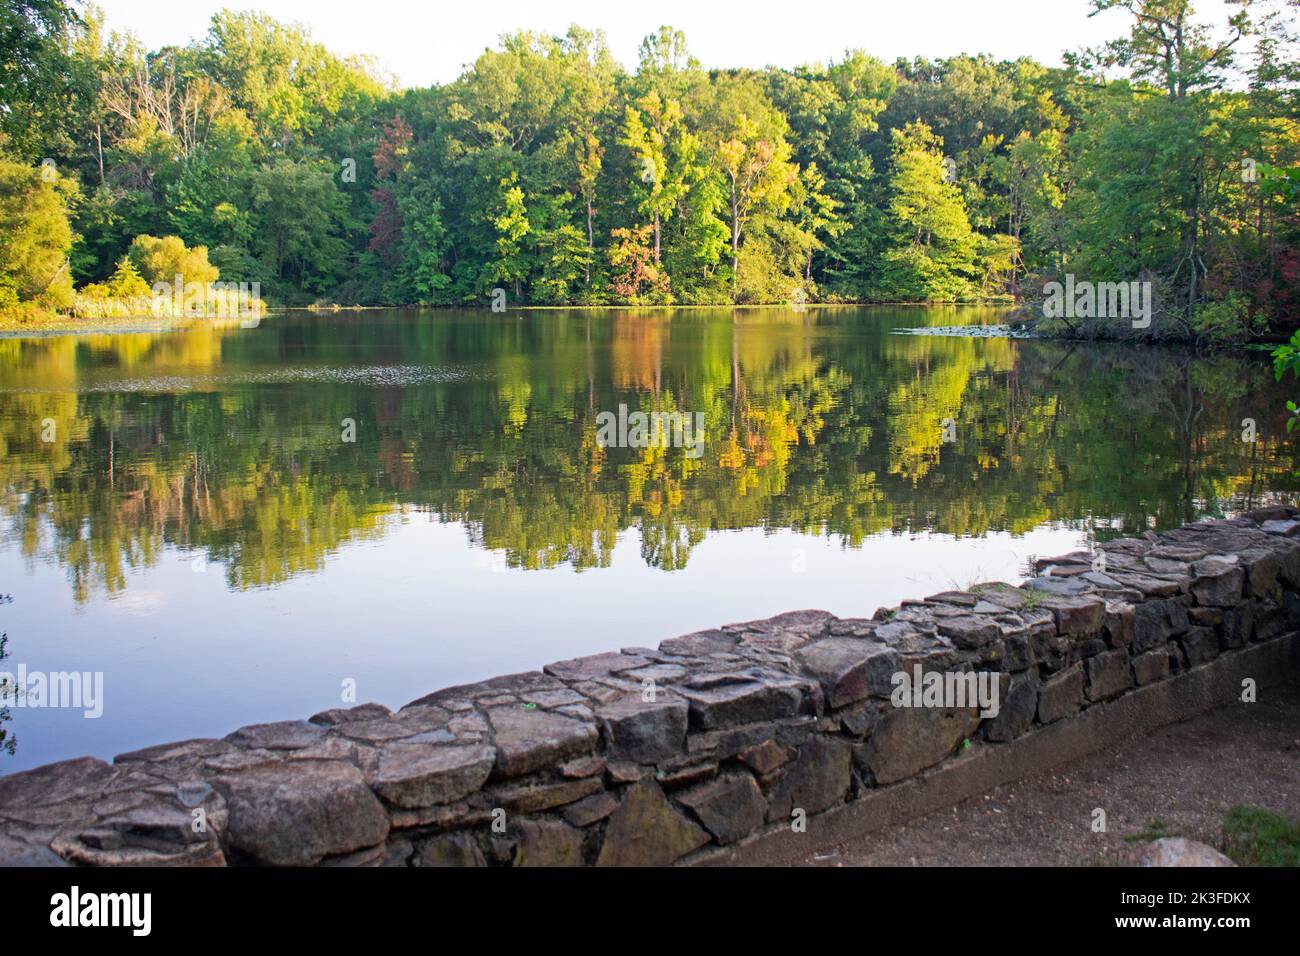 Reflections of trees and leaves in lake at Davidson's Mill Pond Park on a bright sunny day -12 Stock Photo